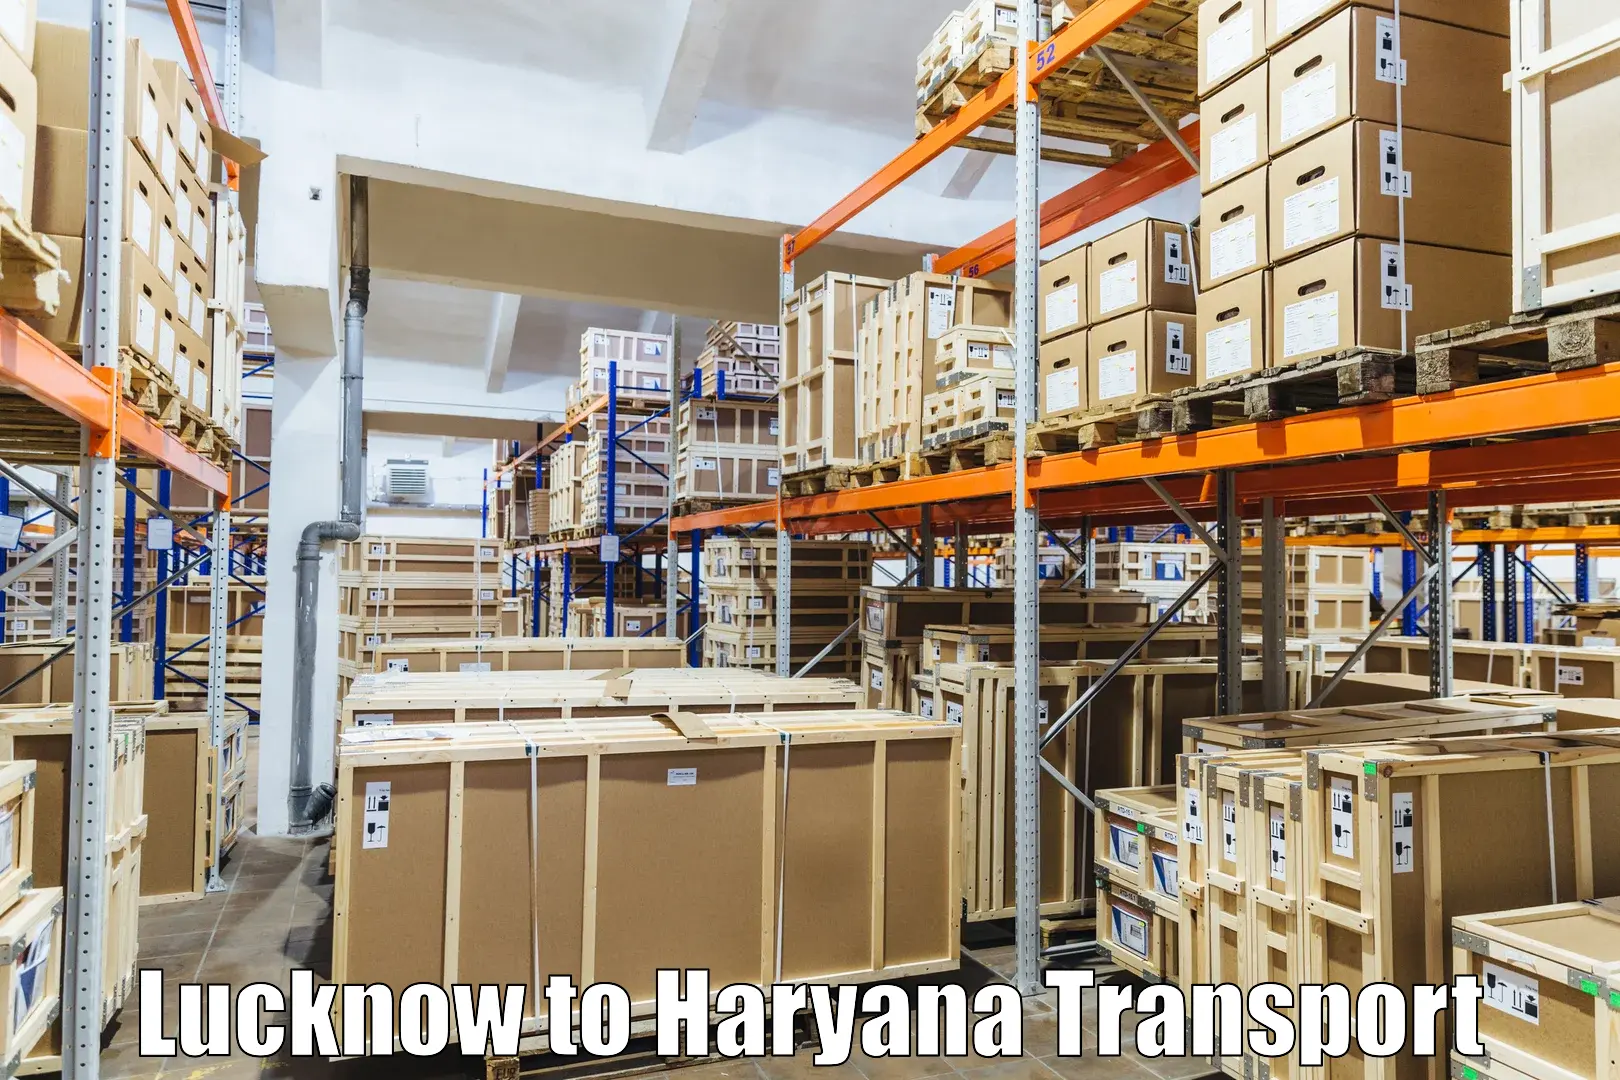 Truck transport companies in India in Lucknow to Yamuna Nagar